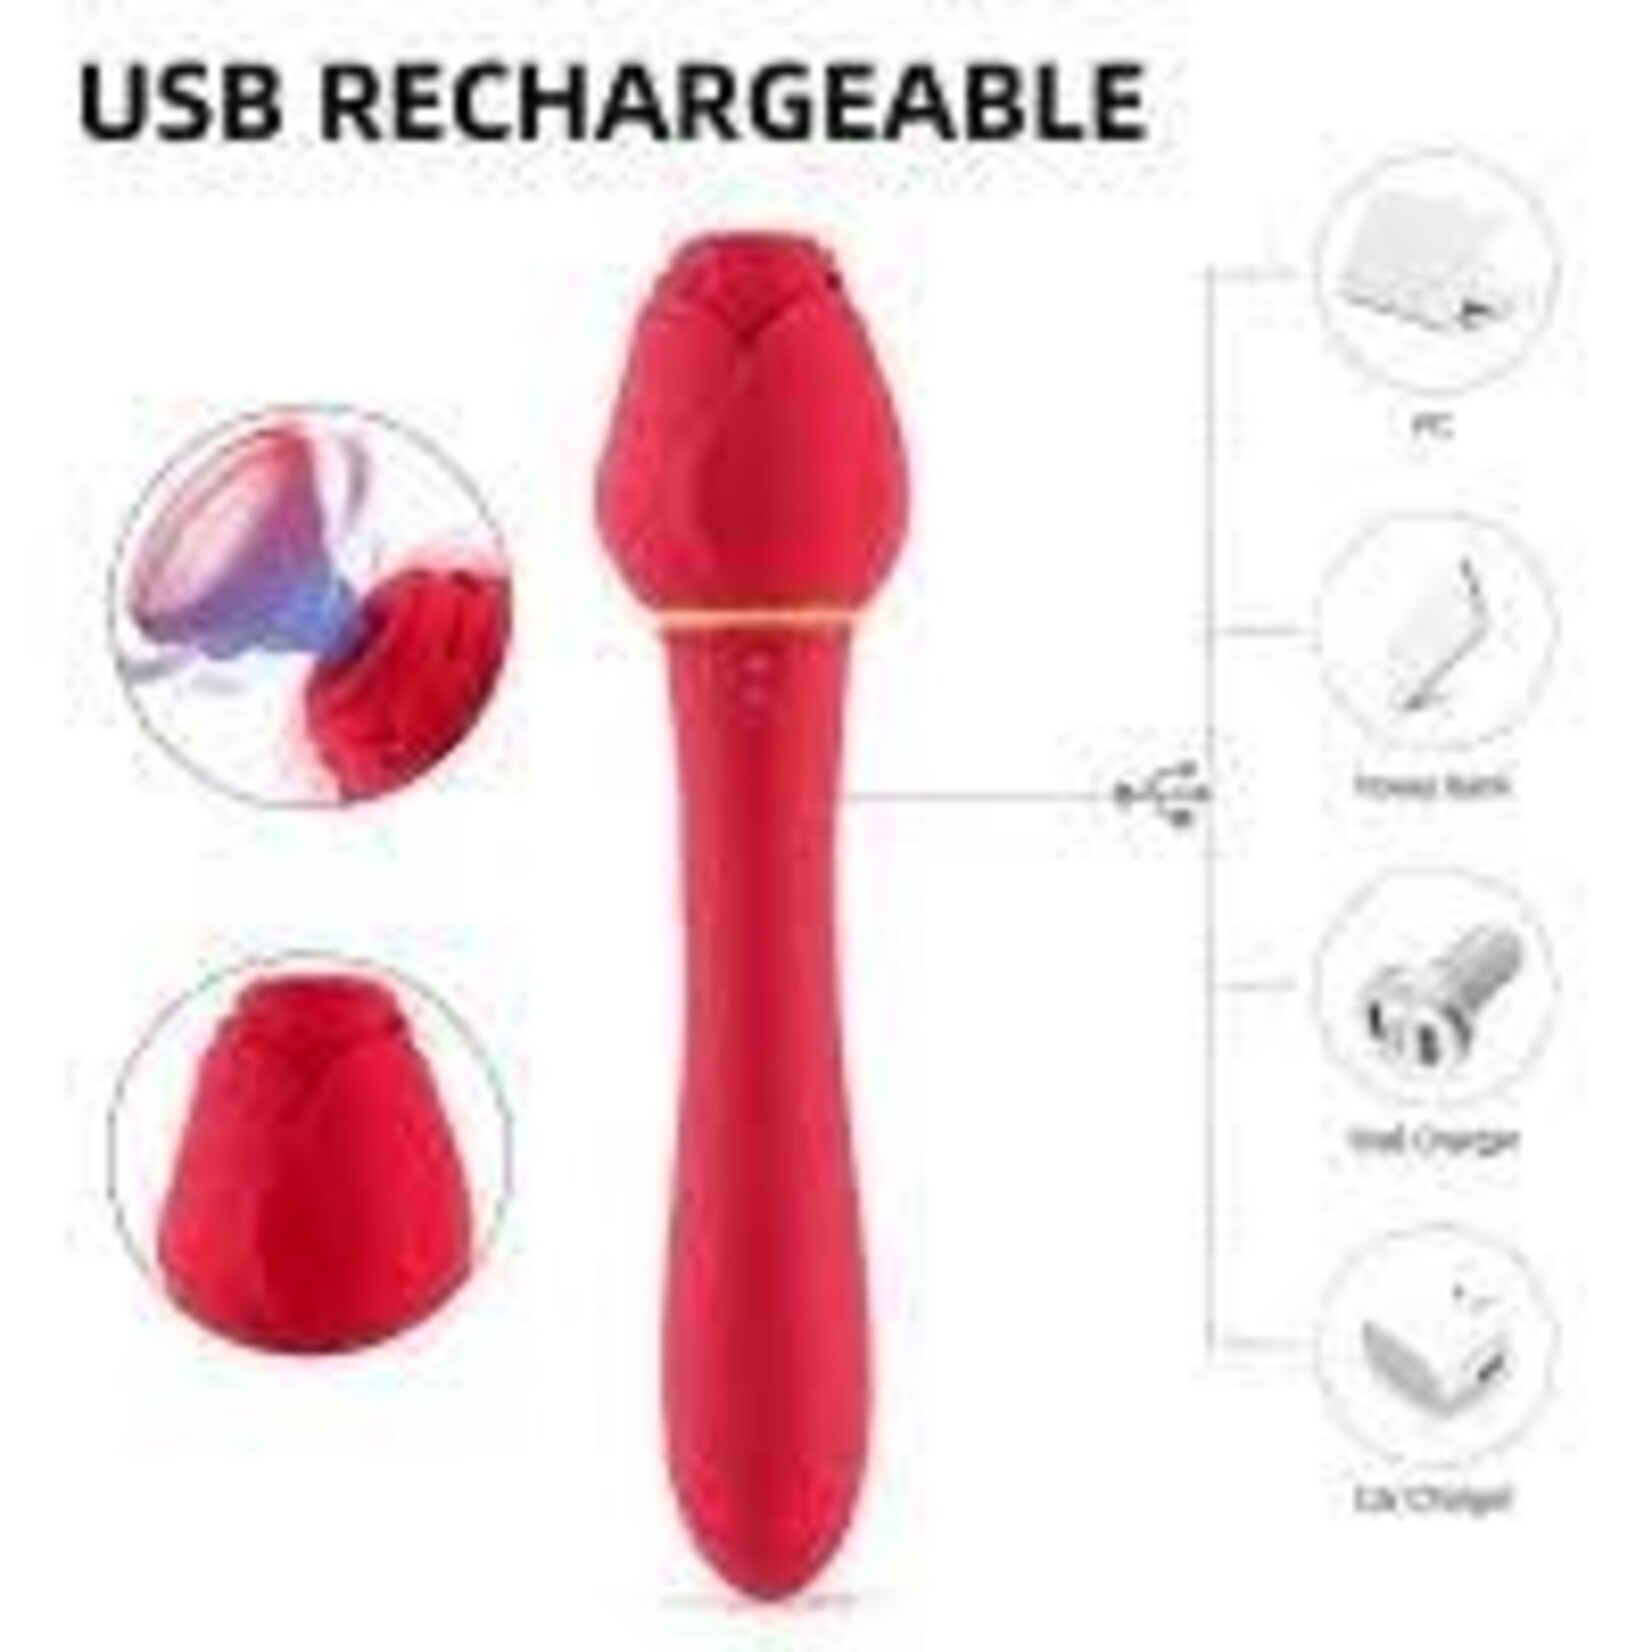 TRACY'S DOG TRACY'S DOG - ROSE WAND VIBRATOR ROSE RED